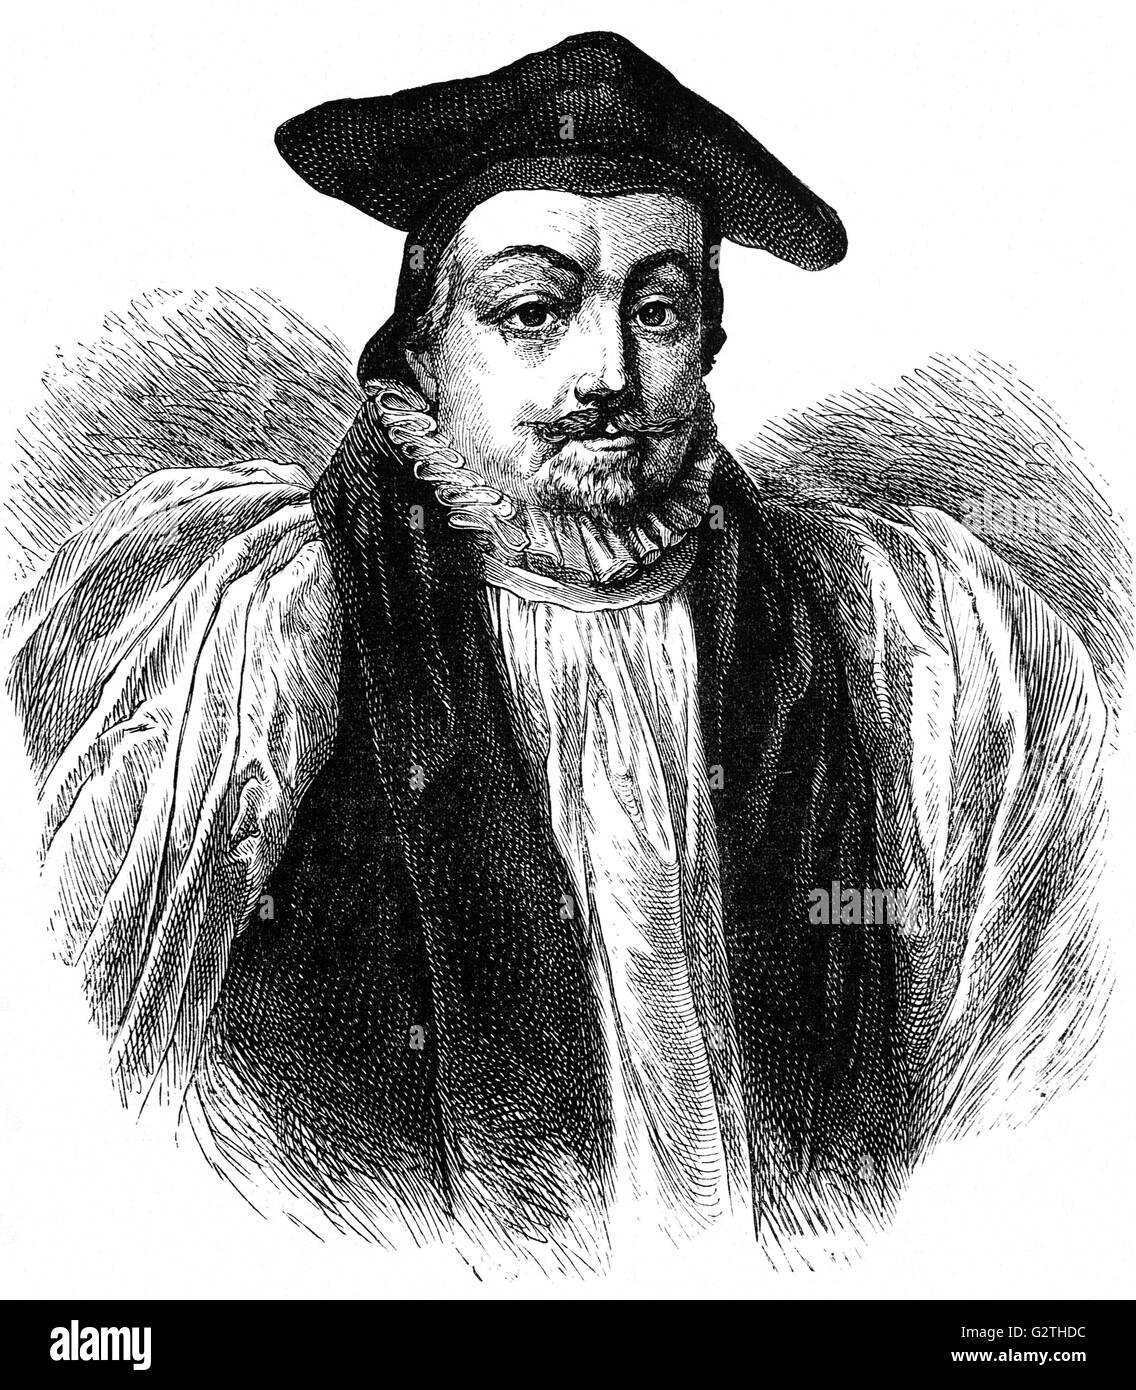 William Laud (1573–1645) was an English bishop and academic. He was the Archbishop of Canterbury from 1633, during the personal rule of Charles I. The Long Parliament of 1640 accused Laud of treason and he was imprisoned in the Tower of London until he was beheaded on 10 January 1645 on Tower Hill. Stock Photo